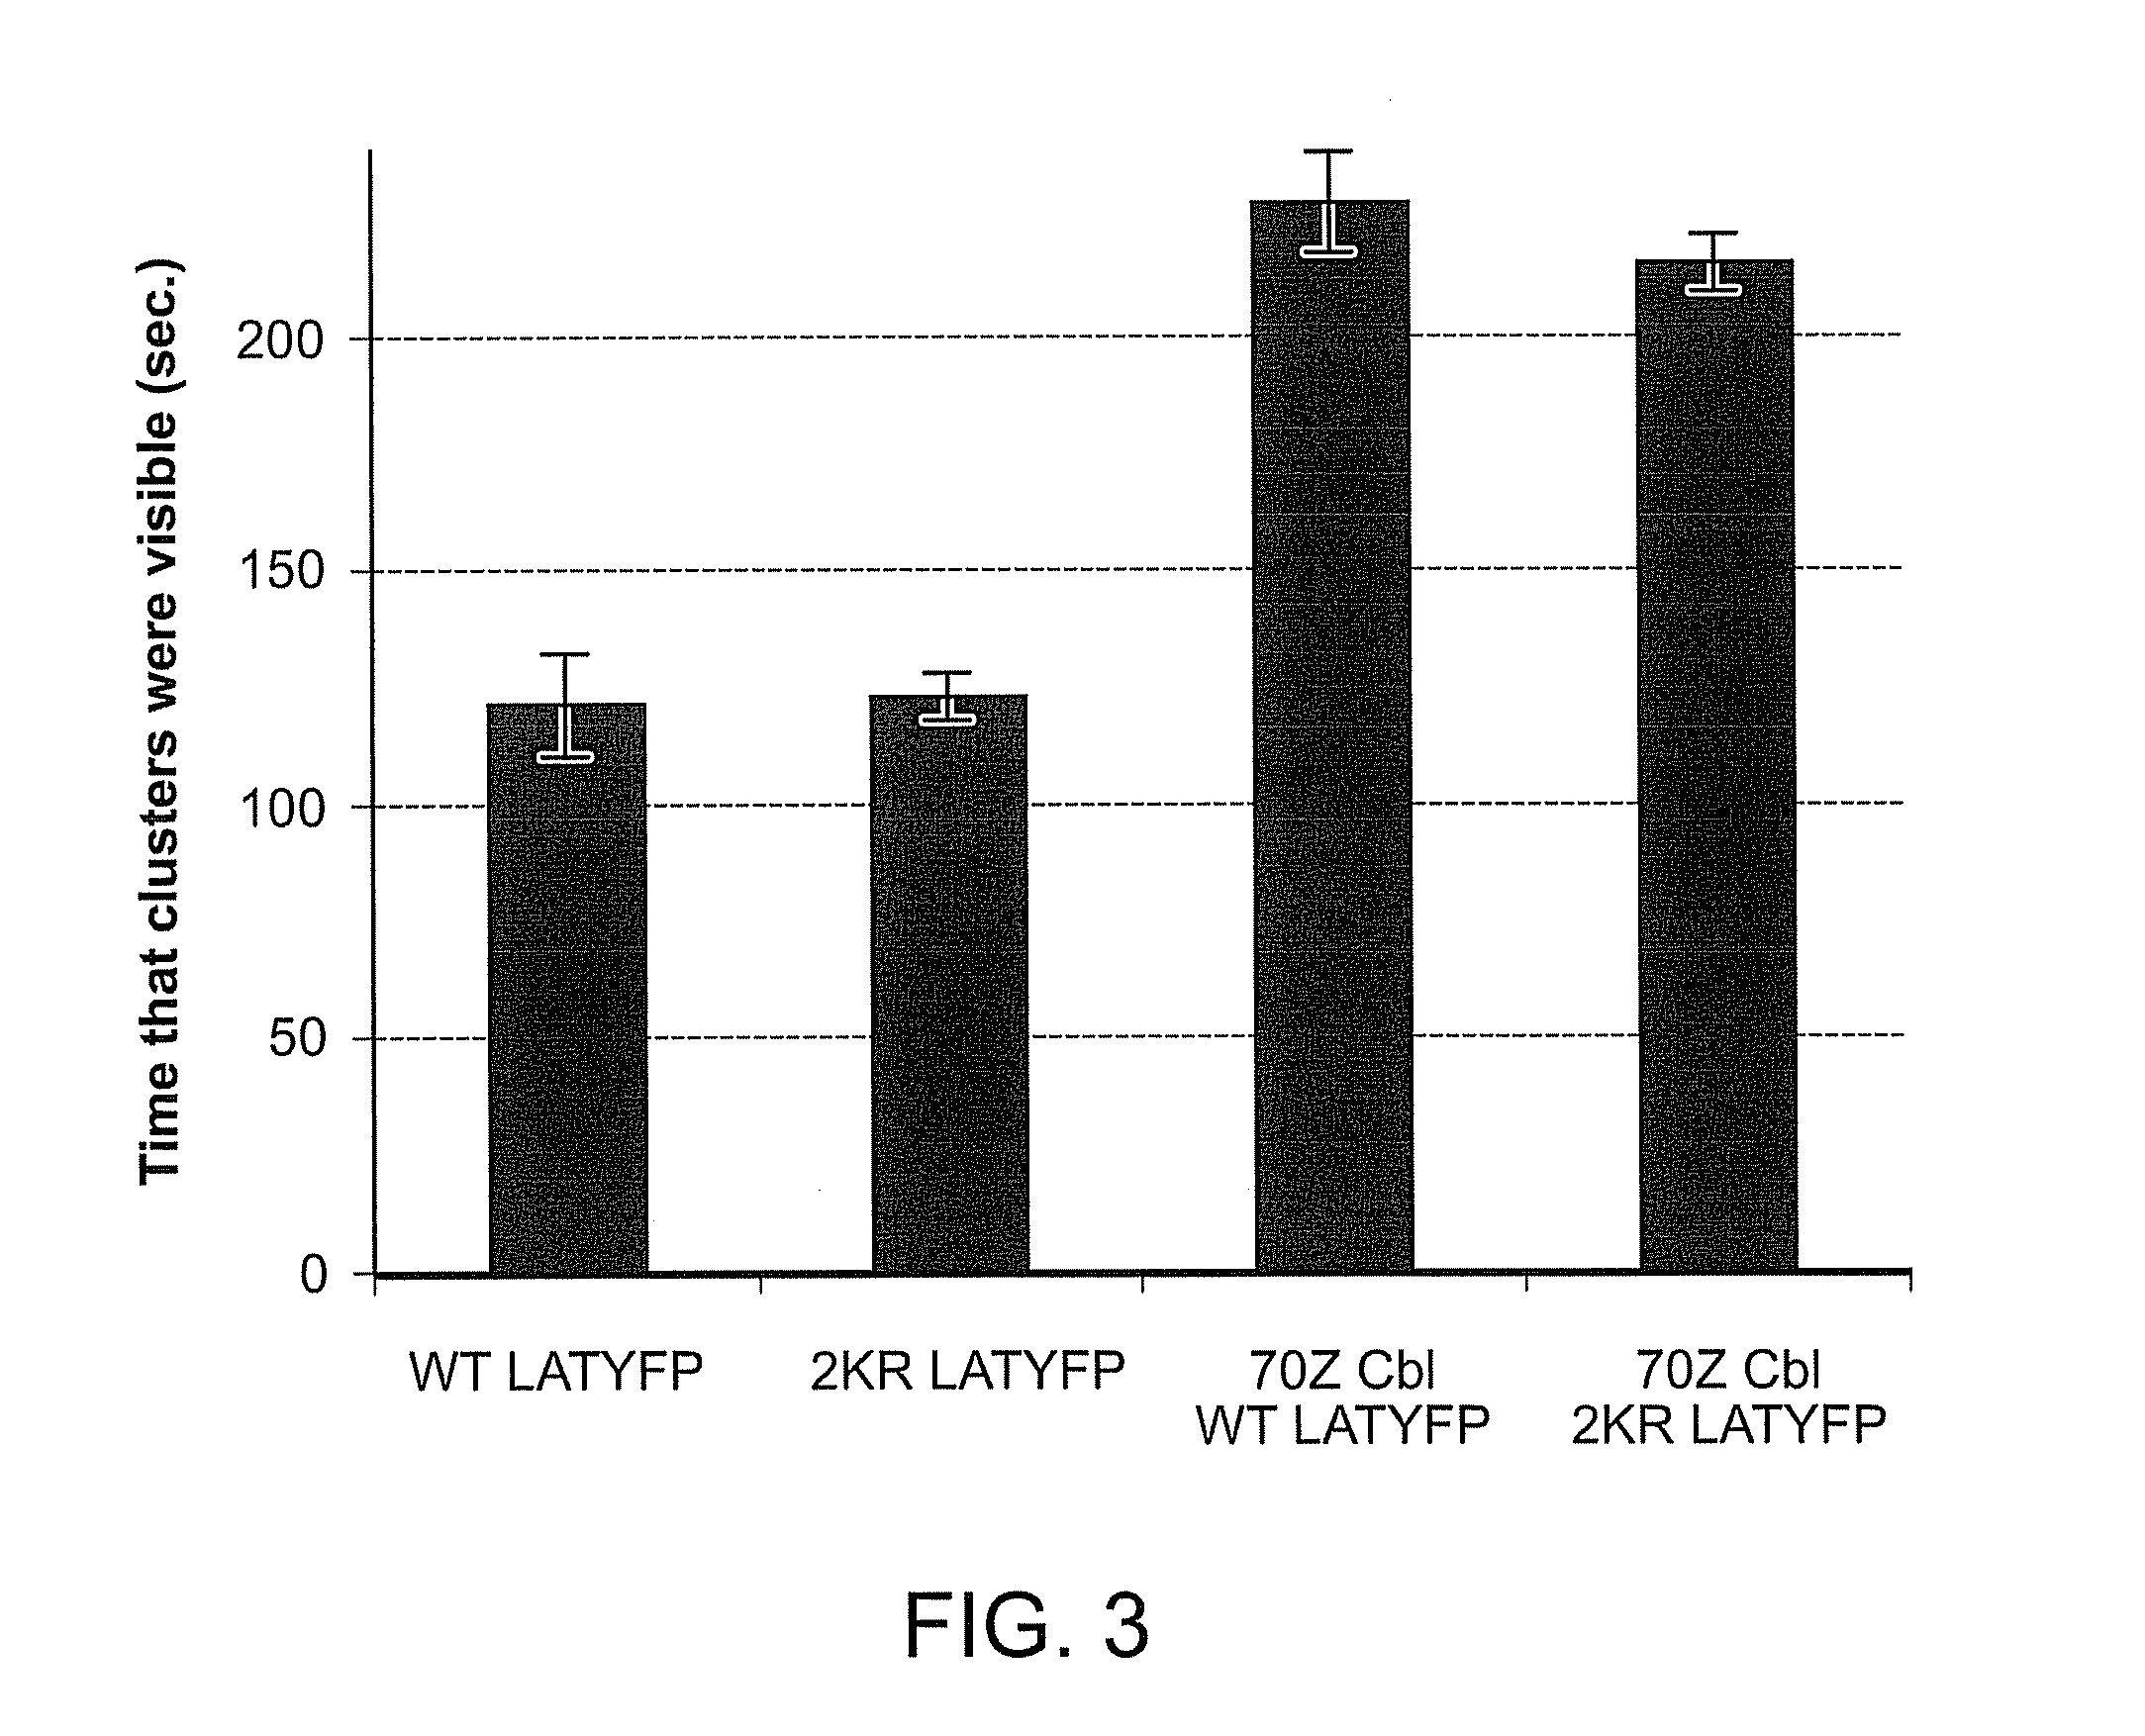 Lat adapter molecule for enhanced t-cell signaling and method of use